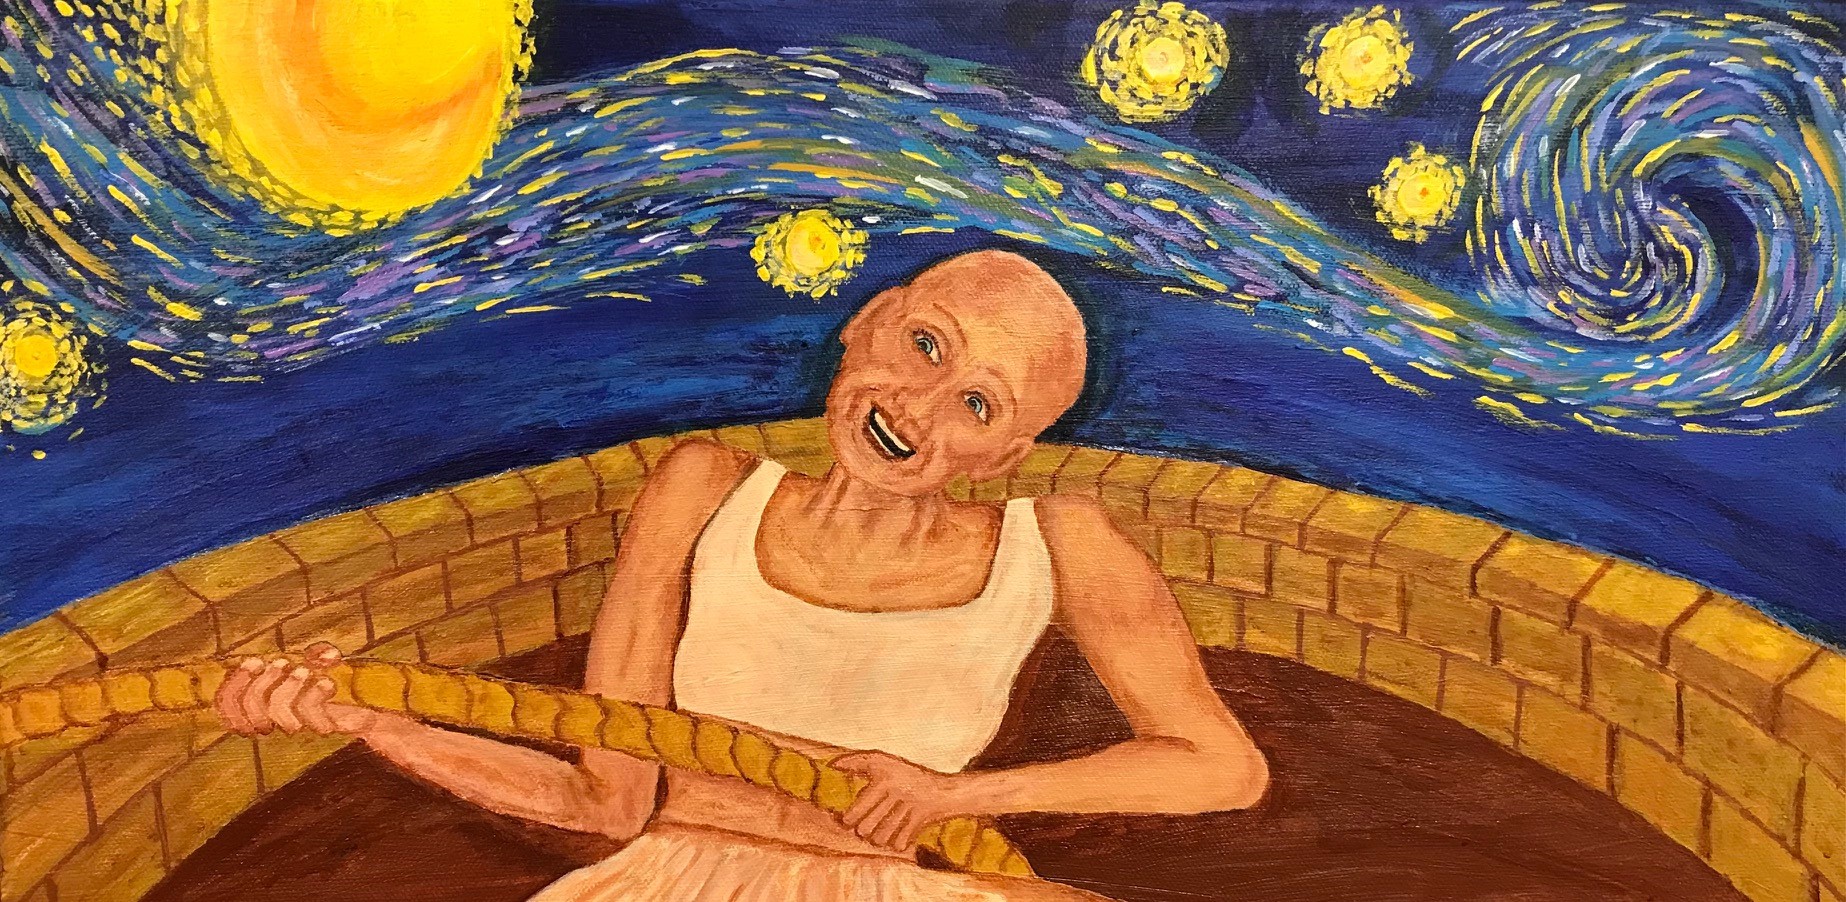 A figure in an arena below a starry night